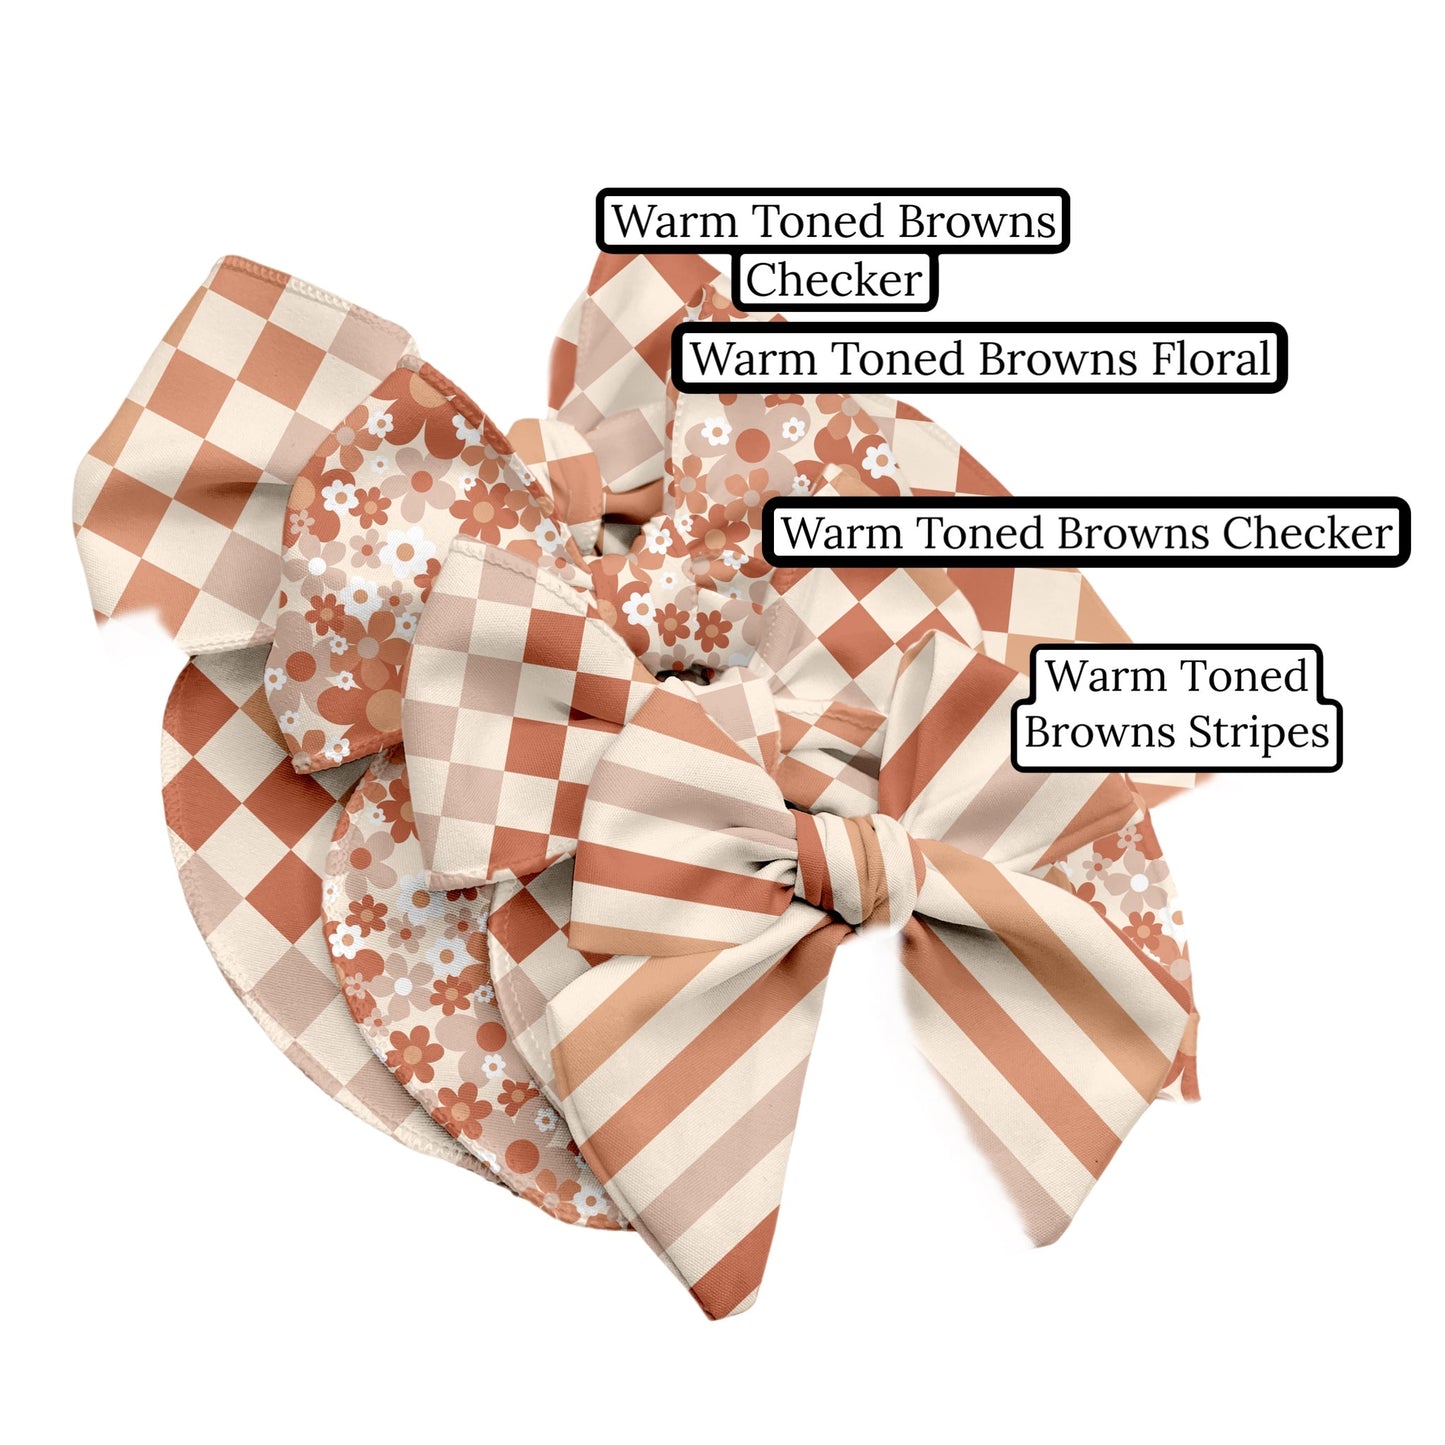 Warm Toned Browns Stripes Hair Bow Strips